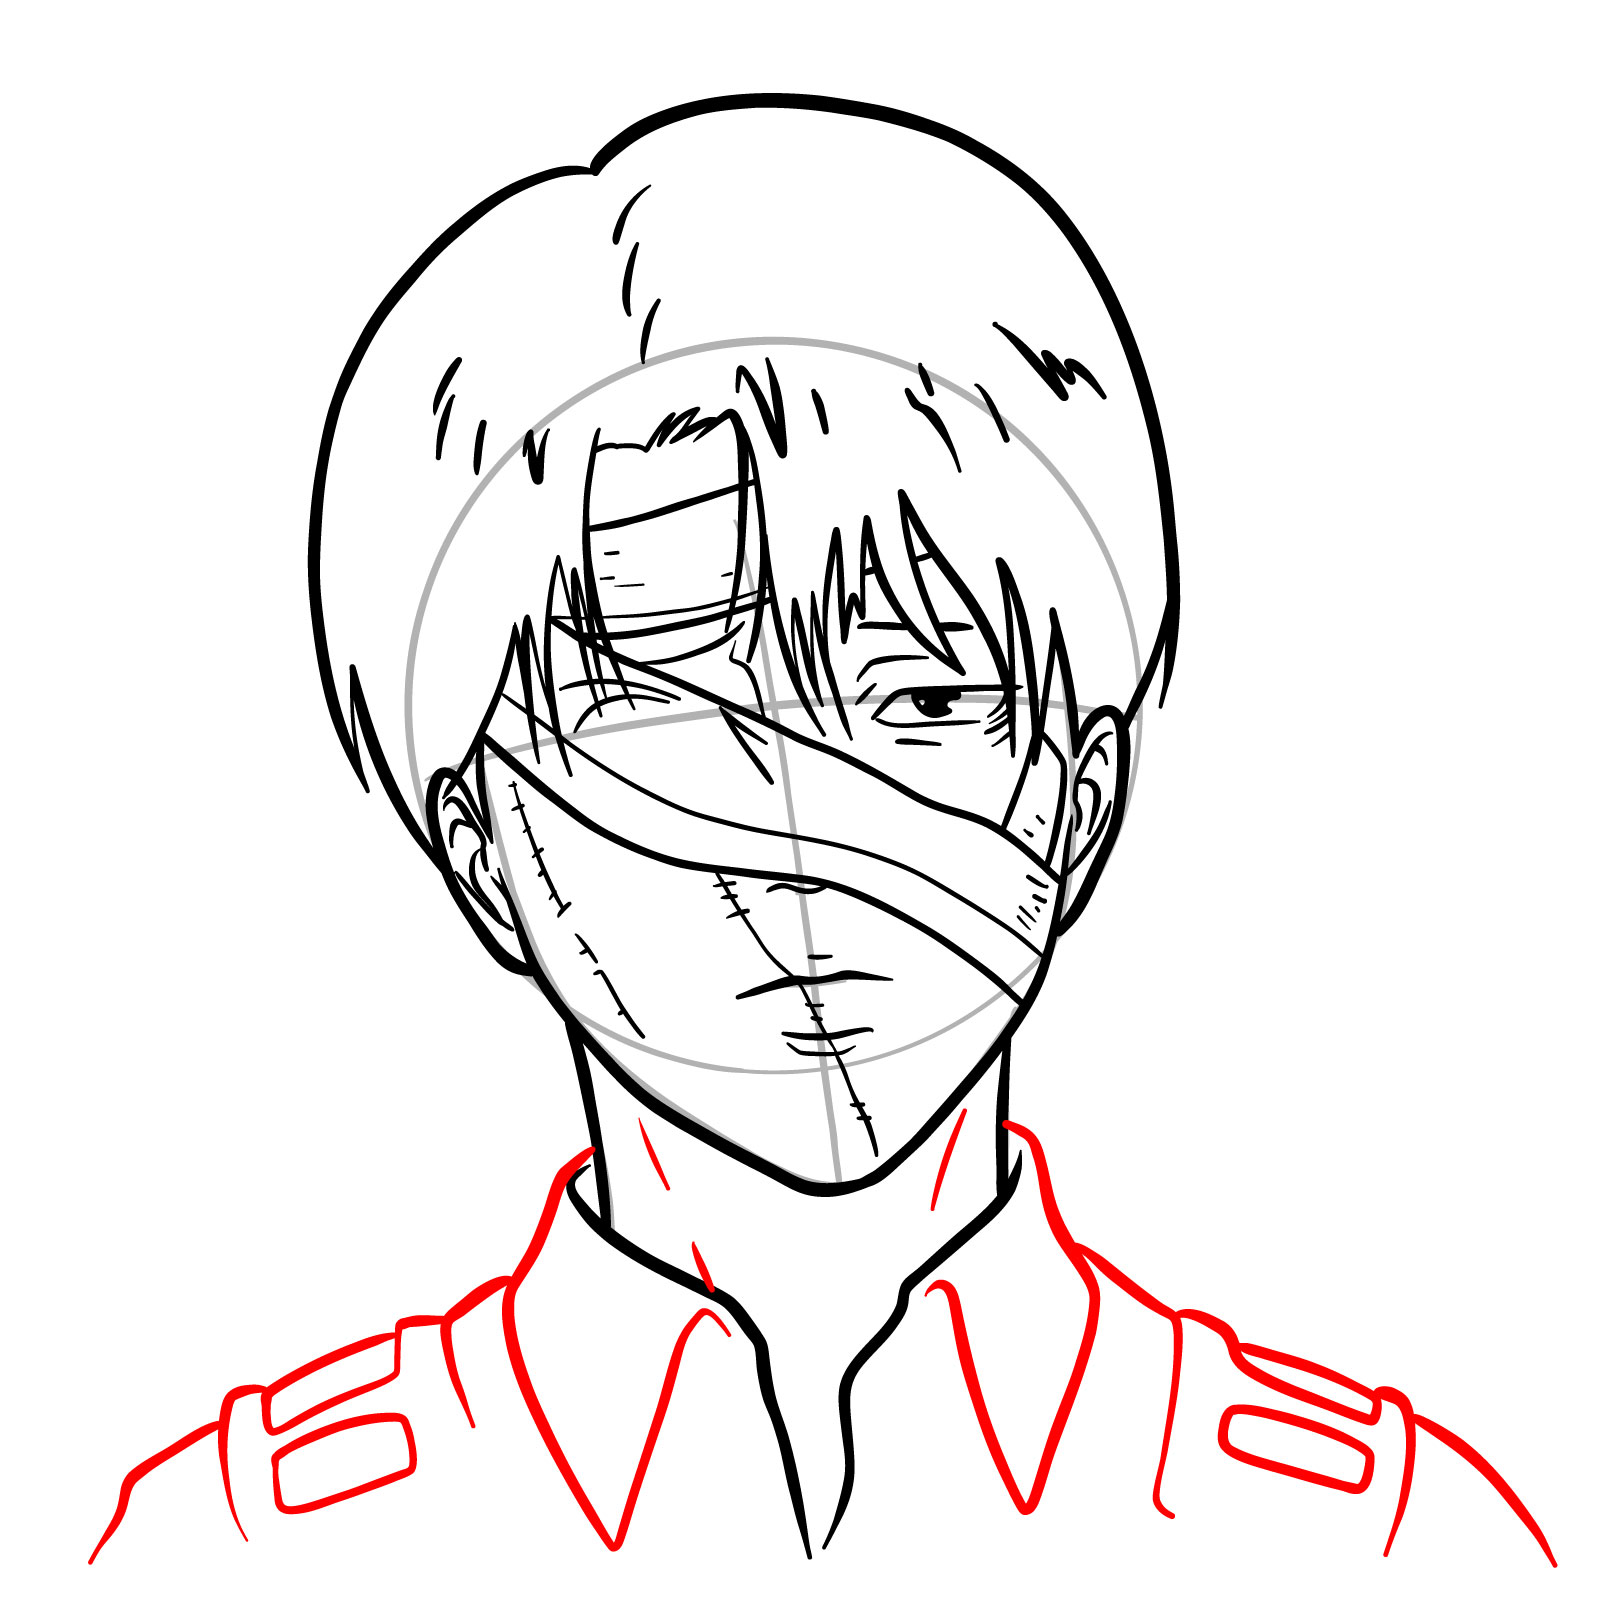 Step-by-step guide to drawing Levi's collar and shoulders from Attack on Titan - step 13